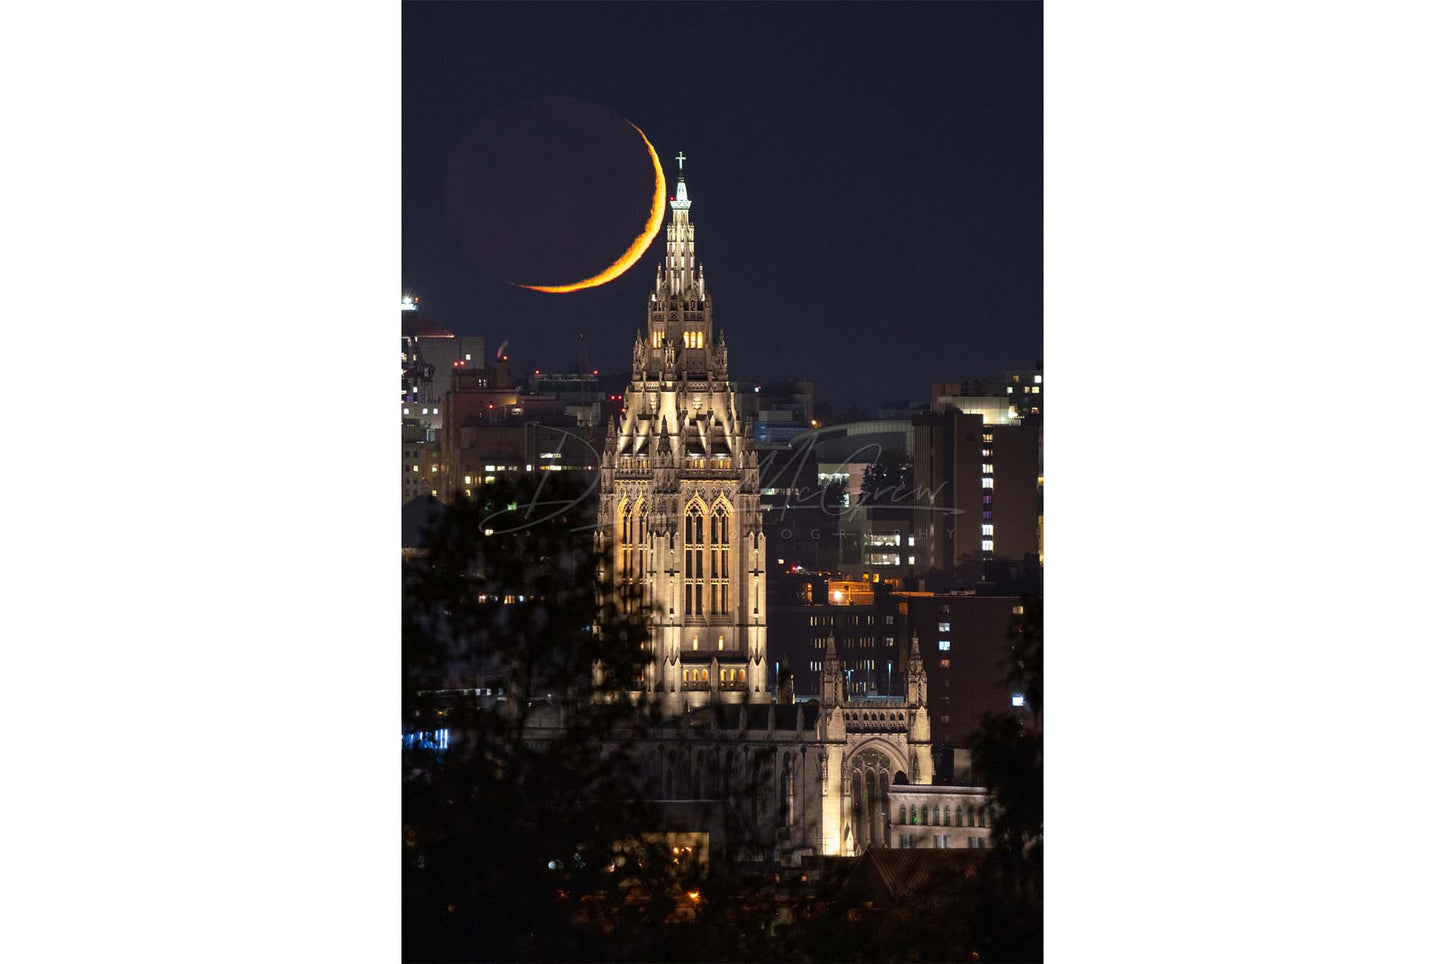 Photo of East Liberty Presbyterian Church and Crescent Moon